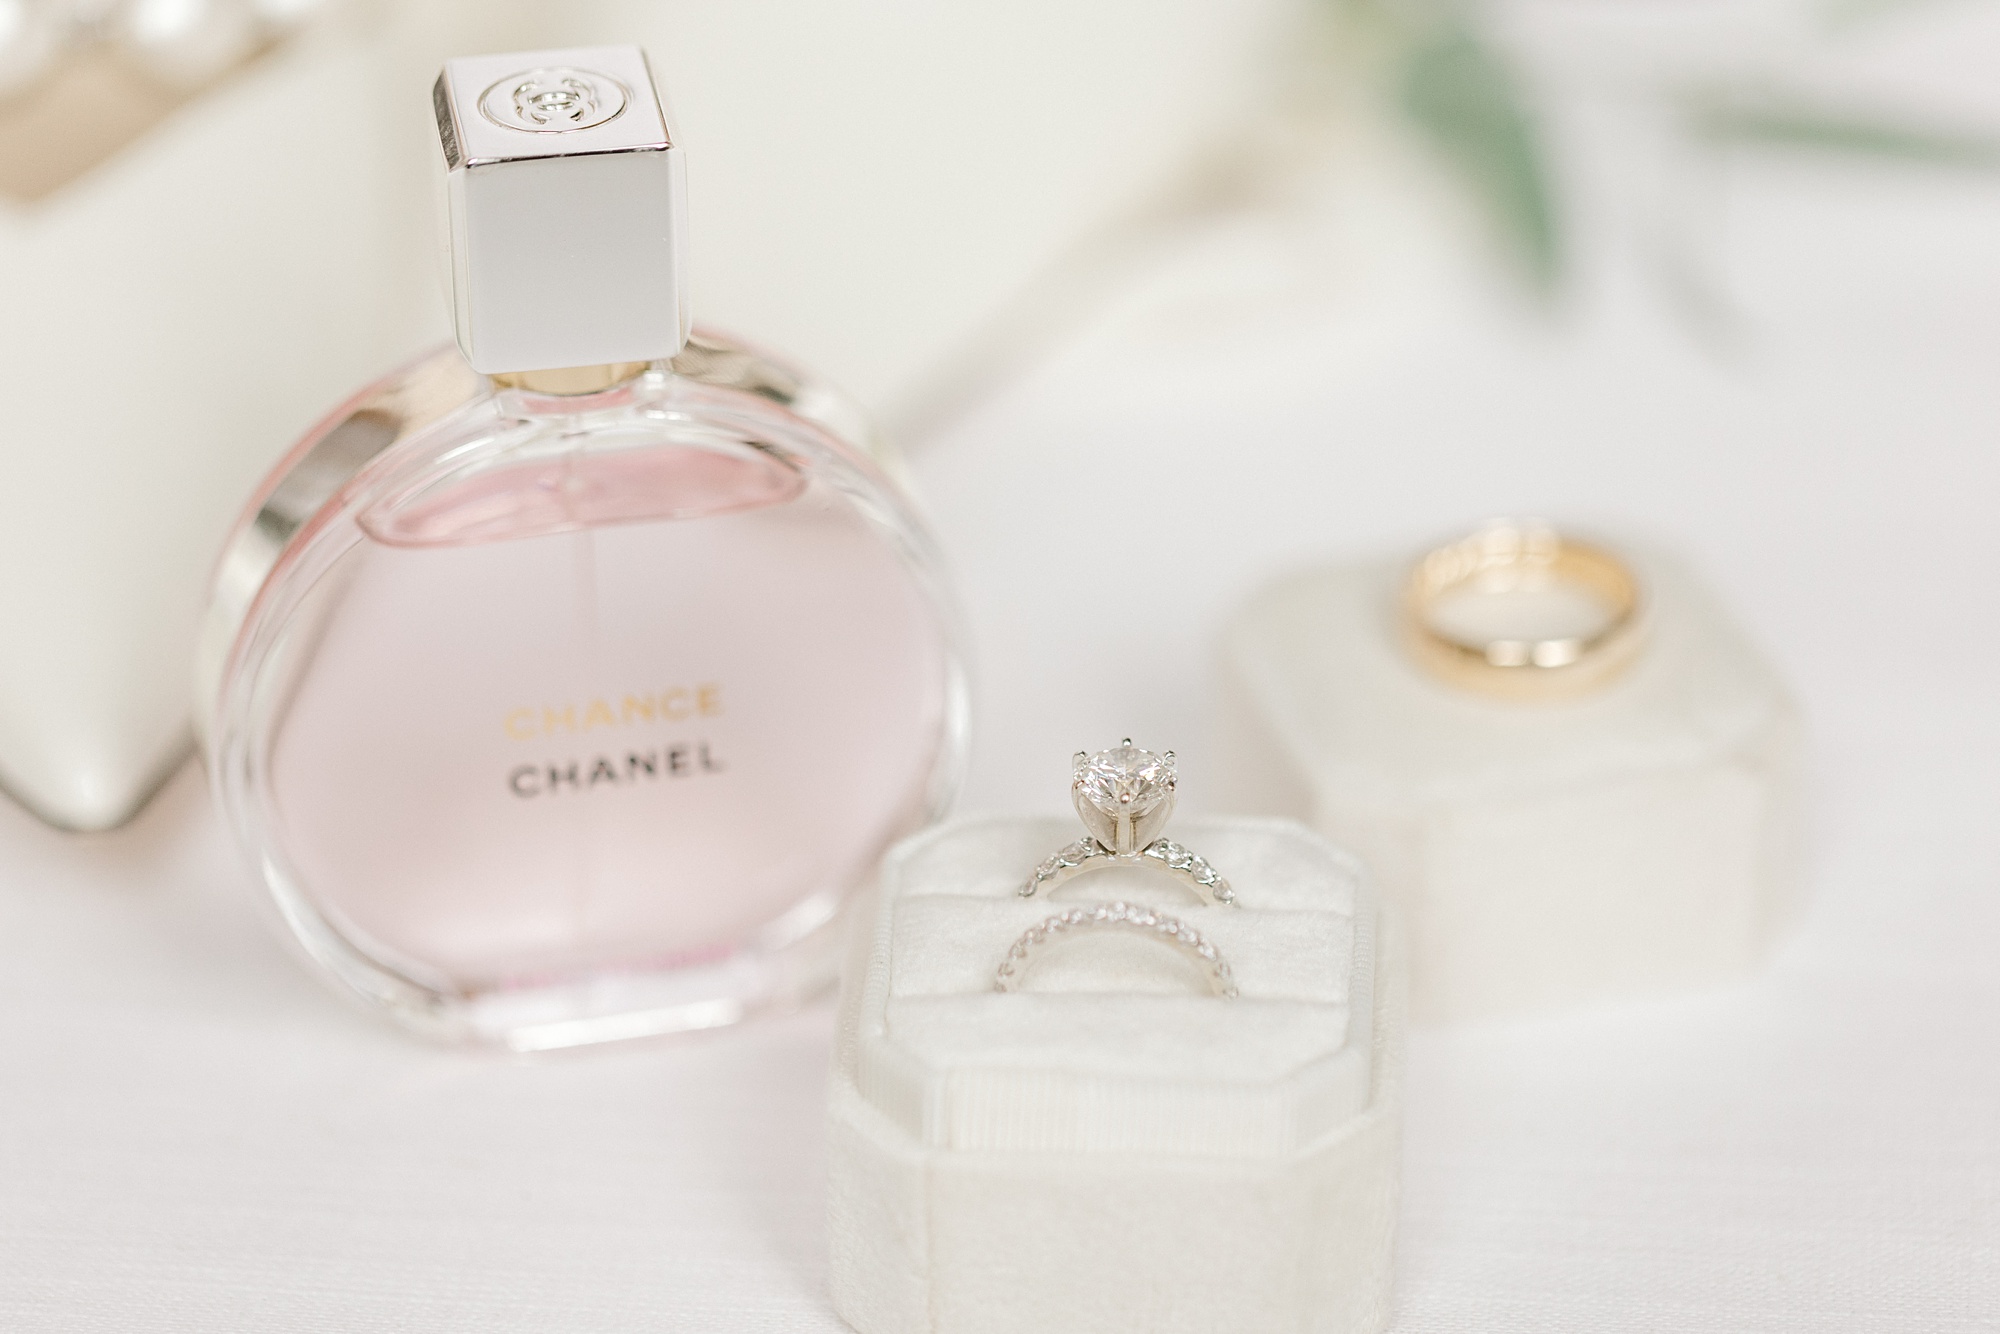 bride's jewelry and Chanel perfume for NJ wedding day